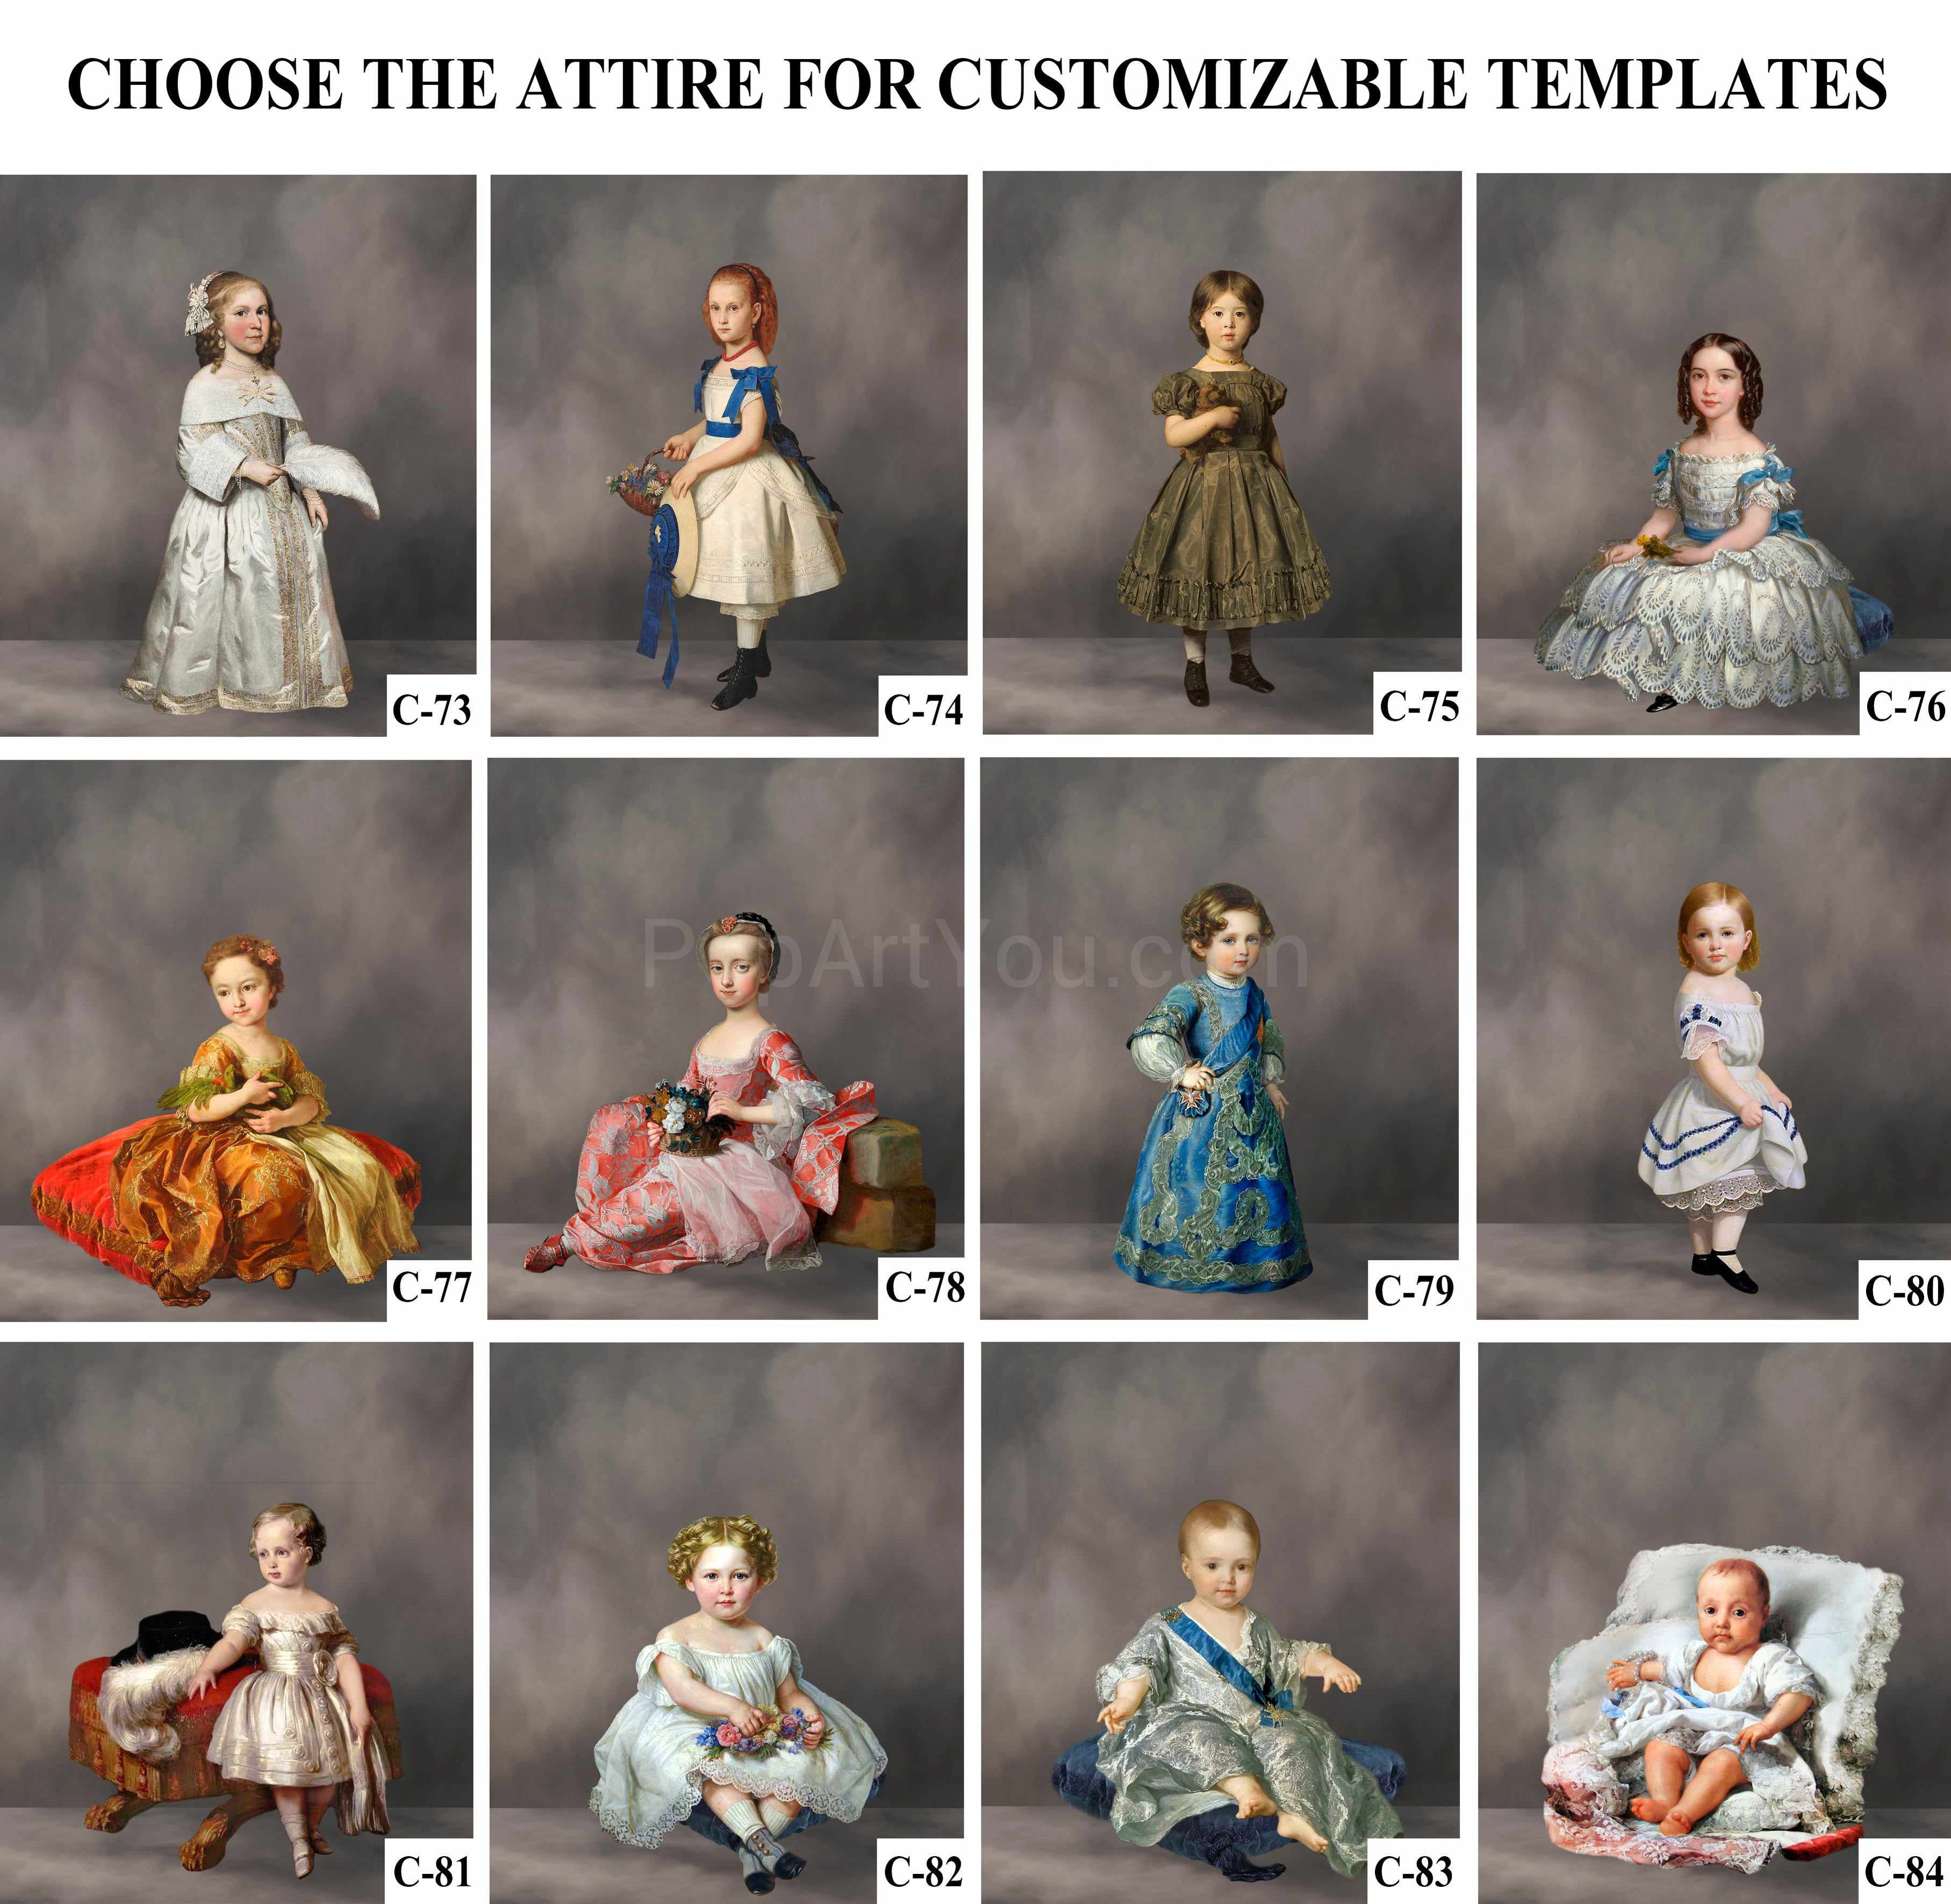 The second Universal family template with pets in attire for any family combination portrait